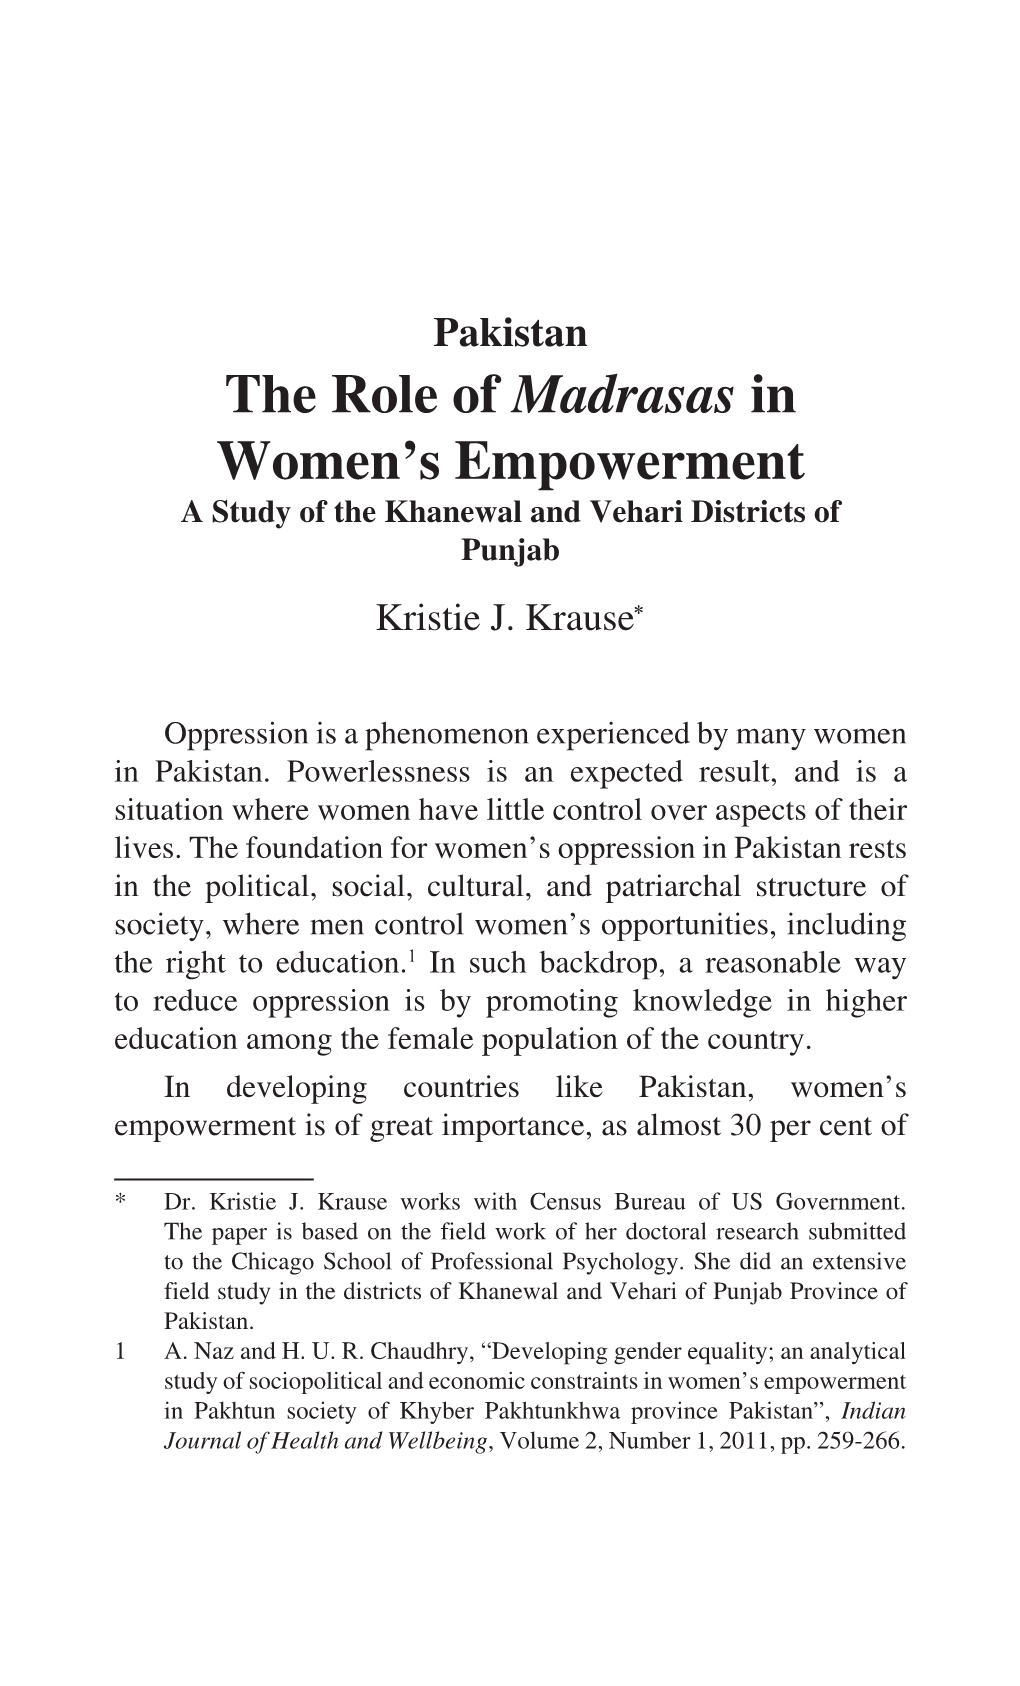 The Role of Madrasas in Women's Empowerment